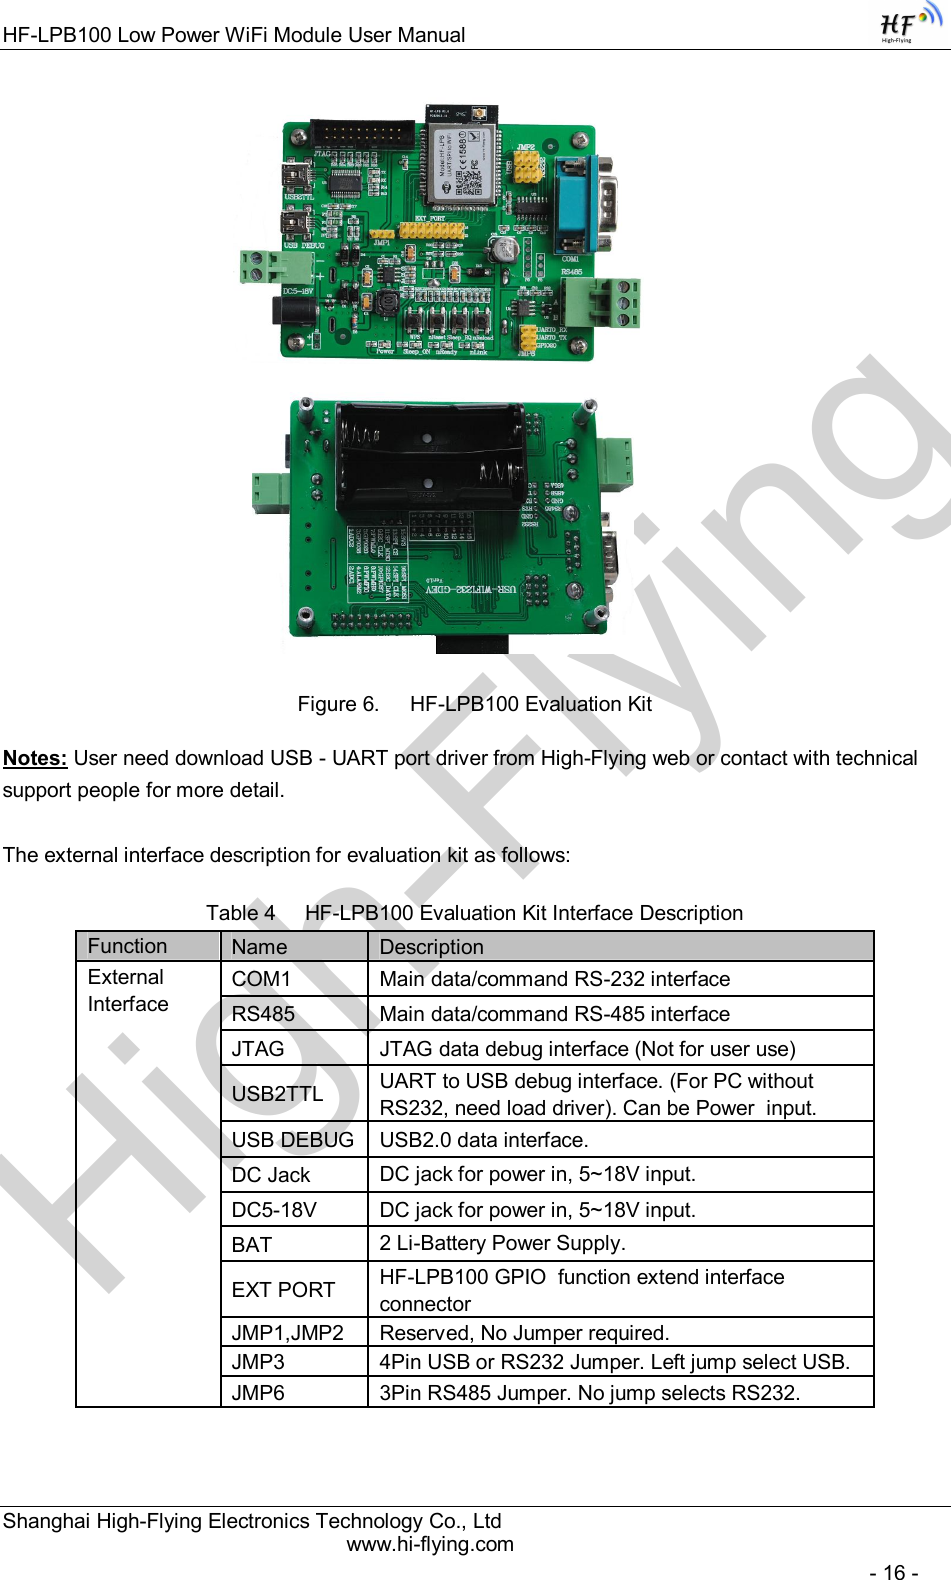 High-FlyingHF-LPB100 Low Power WiFi Module User Manual Shanghai High-Flying Electronics Technology Co., Ltd www.hi-flying.com   - 16 -                                        Figure 6.  HF-LPB100 Evaluation Kit Notes: User need download USB - UART port driver from High-Flying web or contact with technical support people for more detail.  The external interface description for evaluation kit as follows: Table 4     HF-LPB100 Evaluation Kit Interface Description         Function  Name  Description External Interface COM1  Main data/command RS-232 interface RS485  Main data/command RS-485 interface JTAG  JTAG data debug interface (Not for user use) USB2TTL  UART to USB debug interface. (For PC without RS232, need load driver). Can be Power  input. USB DEBUG USB2.0 data interface. DC Jack  DC jack for power in, 5~18V input. DC5-18V  DC jack for power in, 5~18V input. BAT  2 Li-Battery Power Supply. EXT PORT  HF-LPB100 GPIO  function extend interface connector JMP1,JMP2  Reserved, No Jumper required. JMP3  4Pin USB or RS232 Jumper. Left jump select USB. JMP6  3Pin RS485 Jumper. No jump selects RS232. 